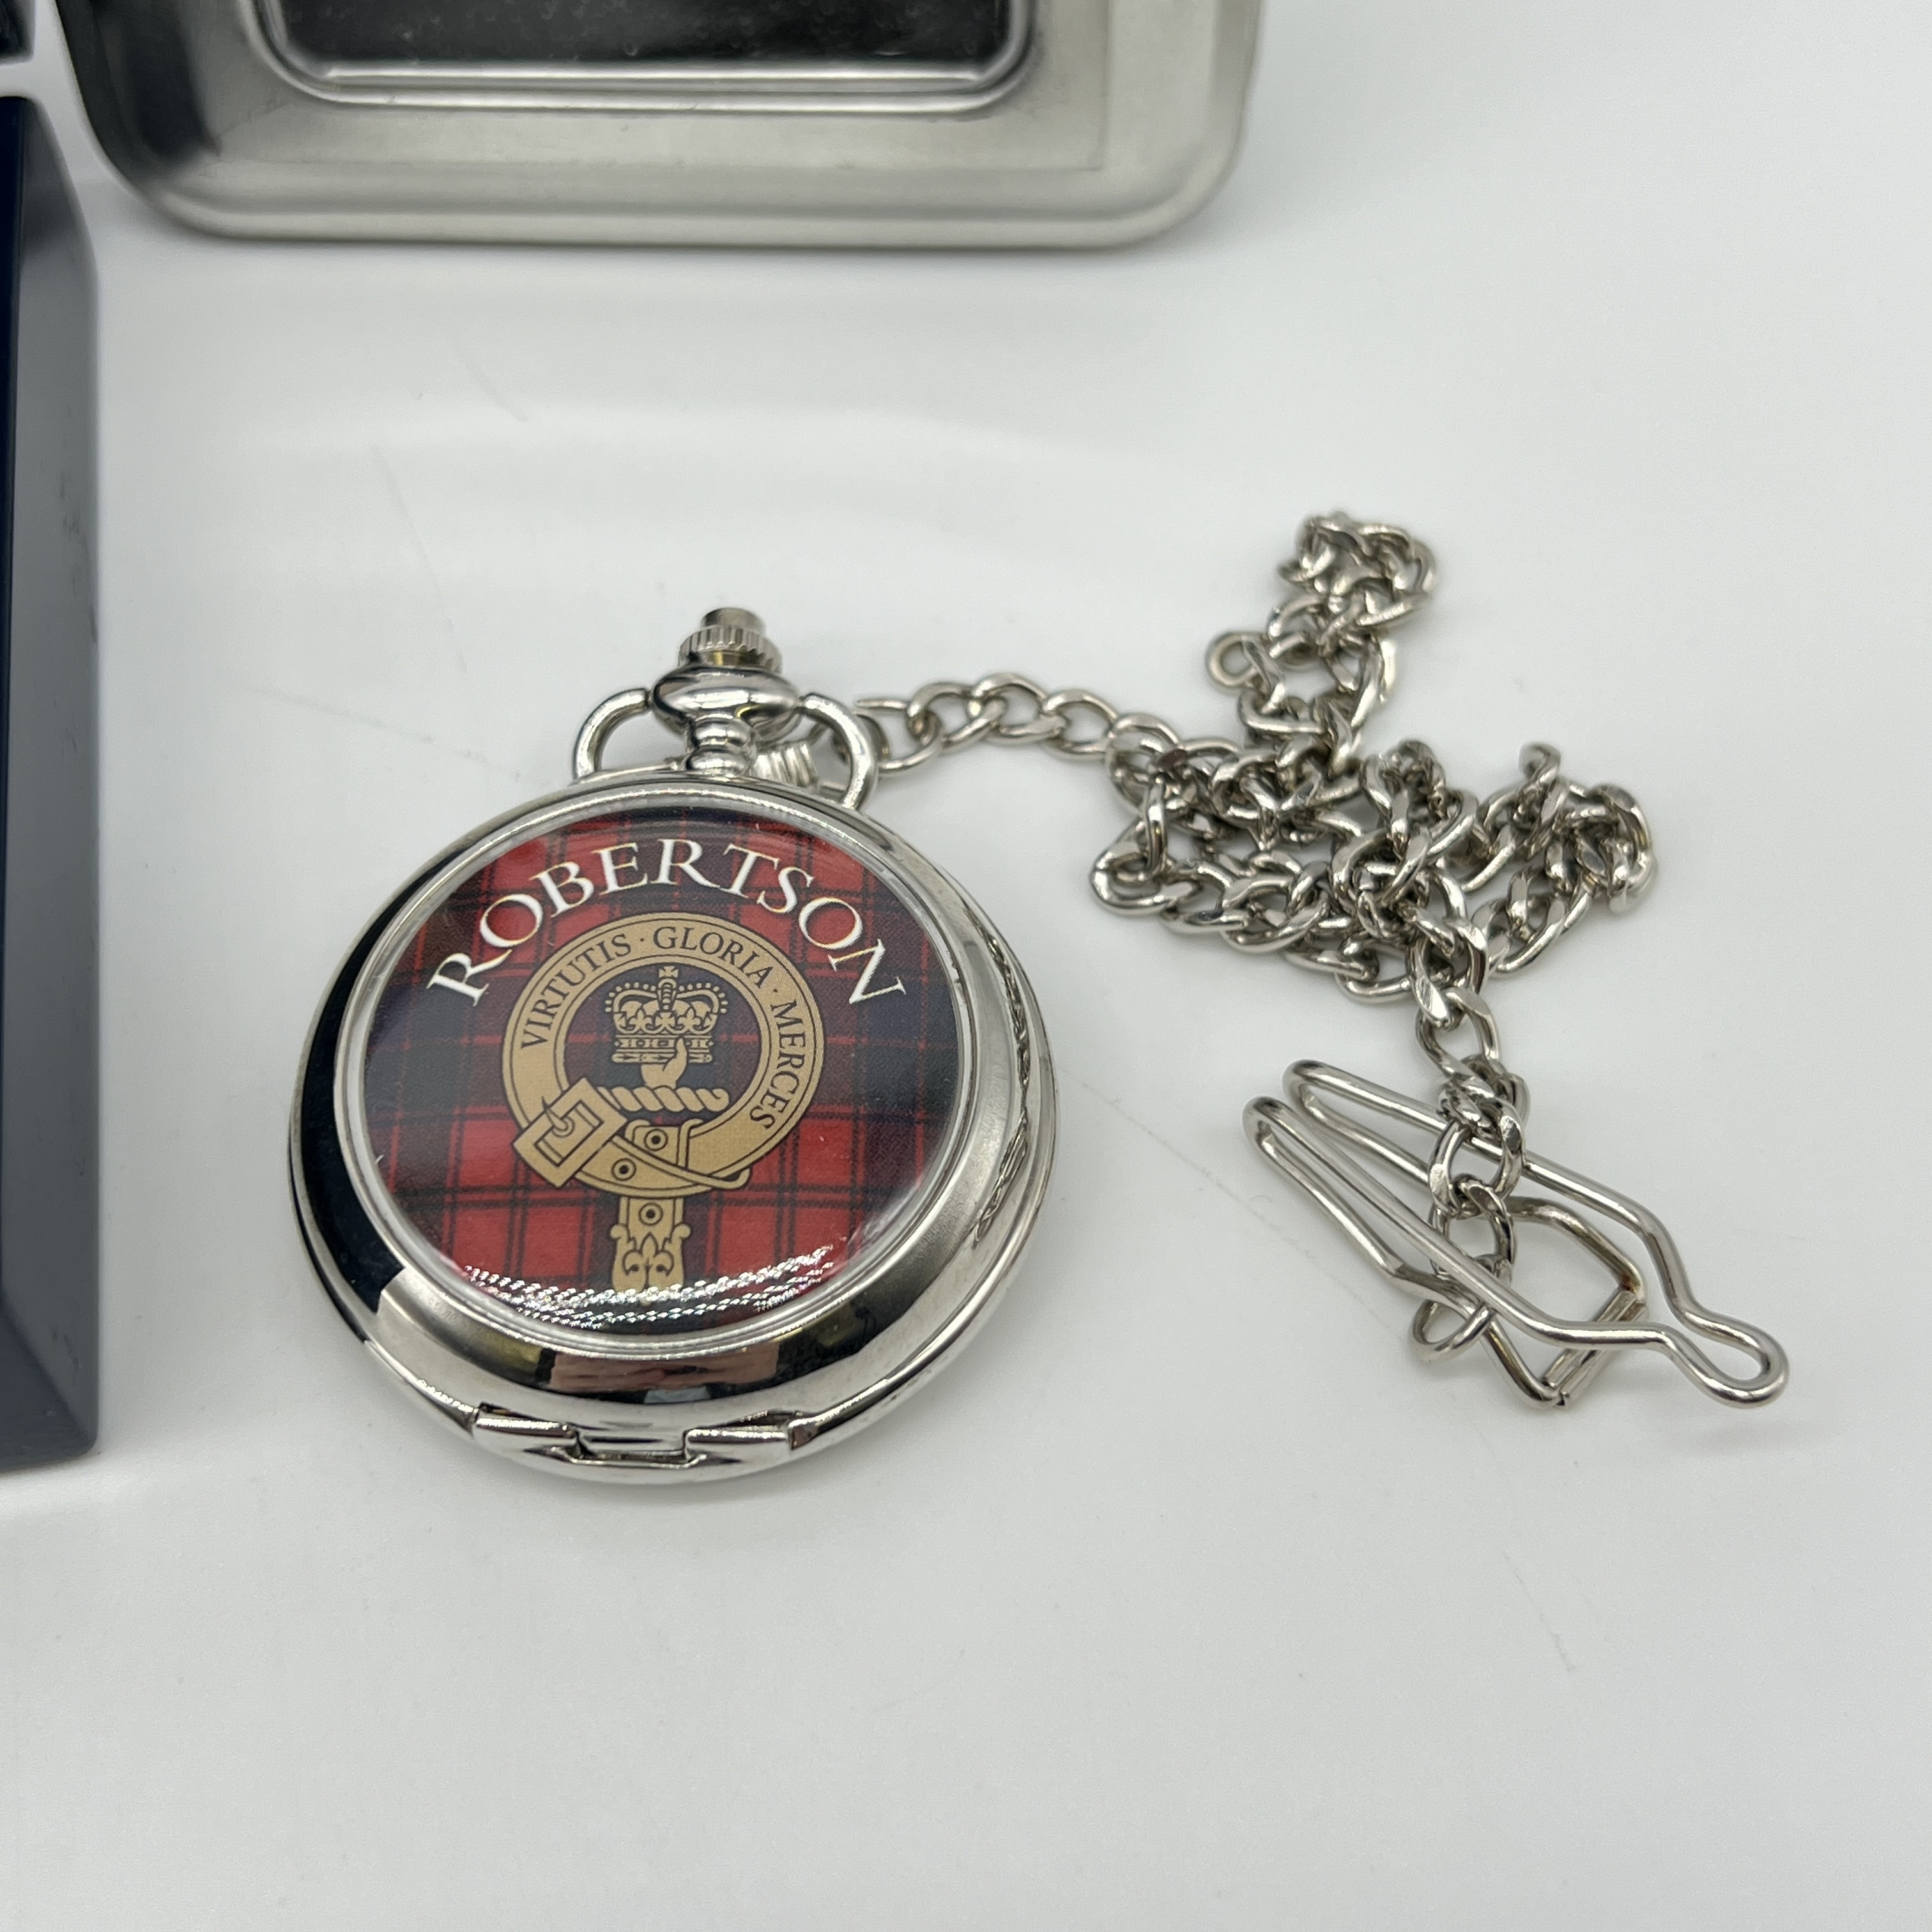 3x pocket watches - Image 4 of 7